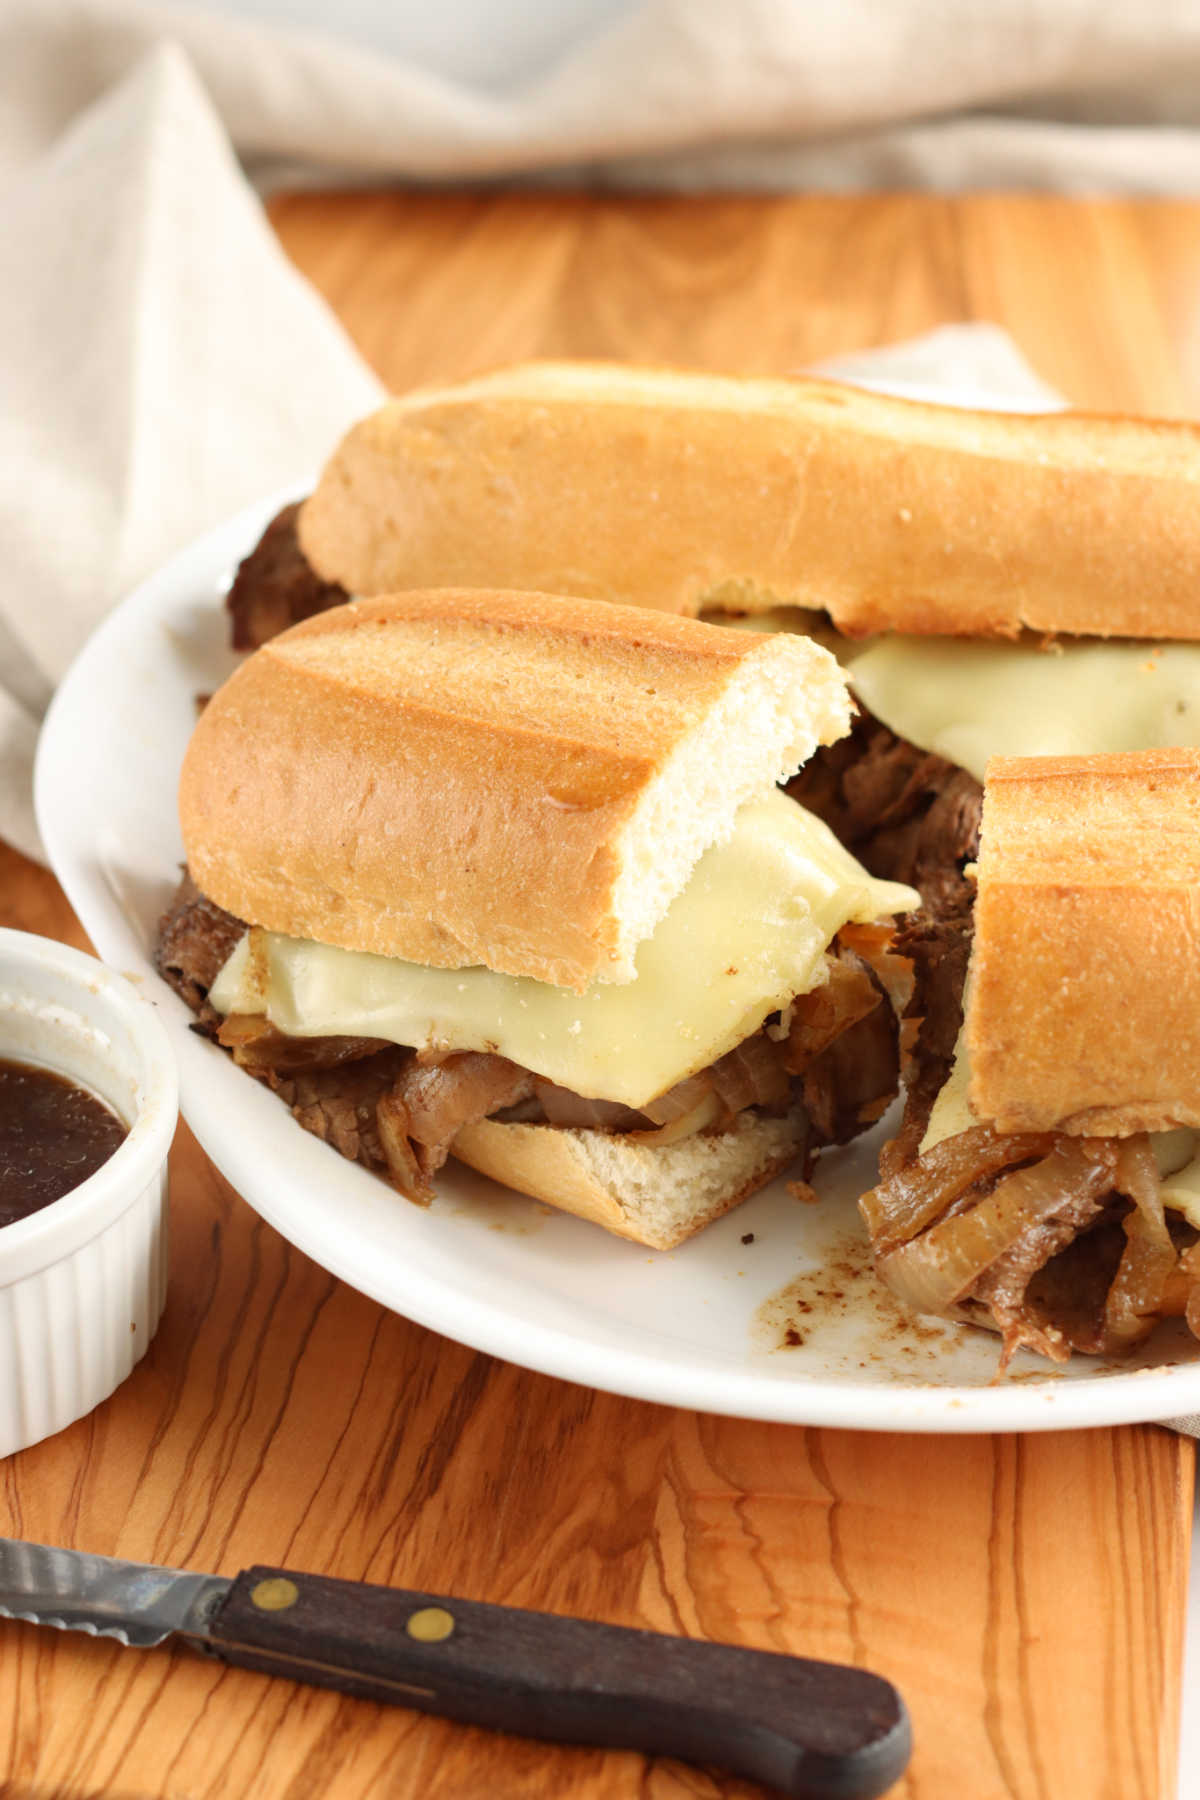 French dip is made with a chuck roast, onion soup mix, apple cider, and simple spices slow cooked.